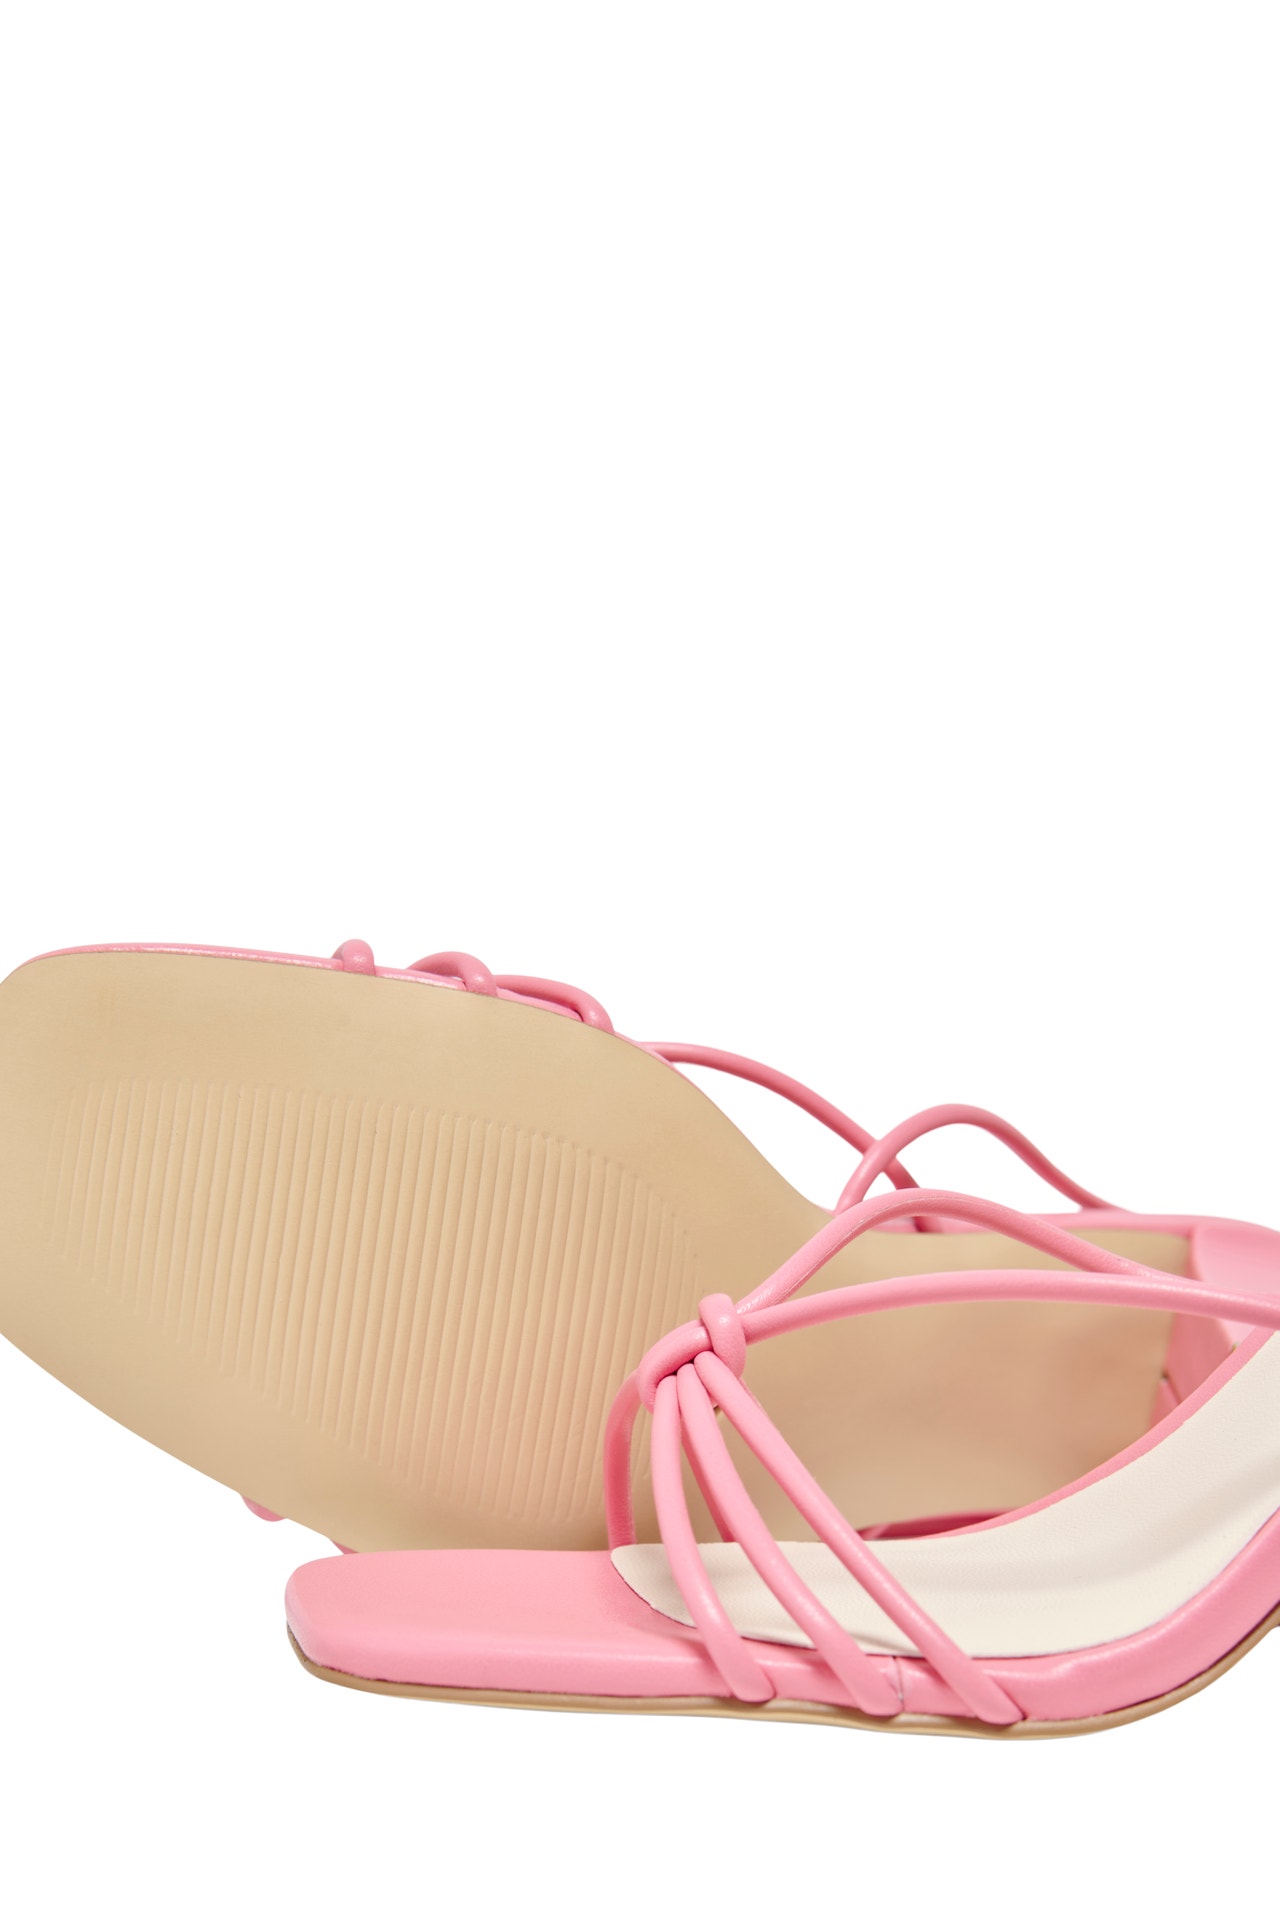 ONLY Heeled sandal with ankle string -Pink Carnation - 15288460